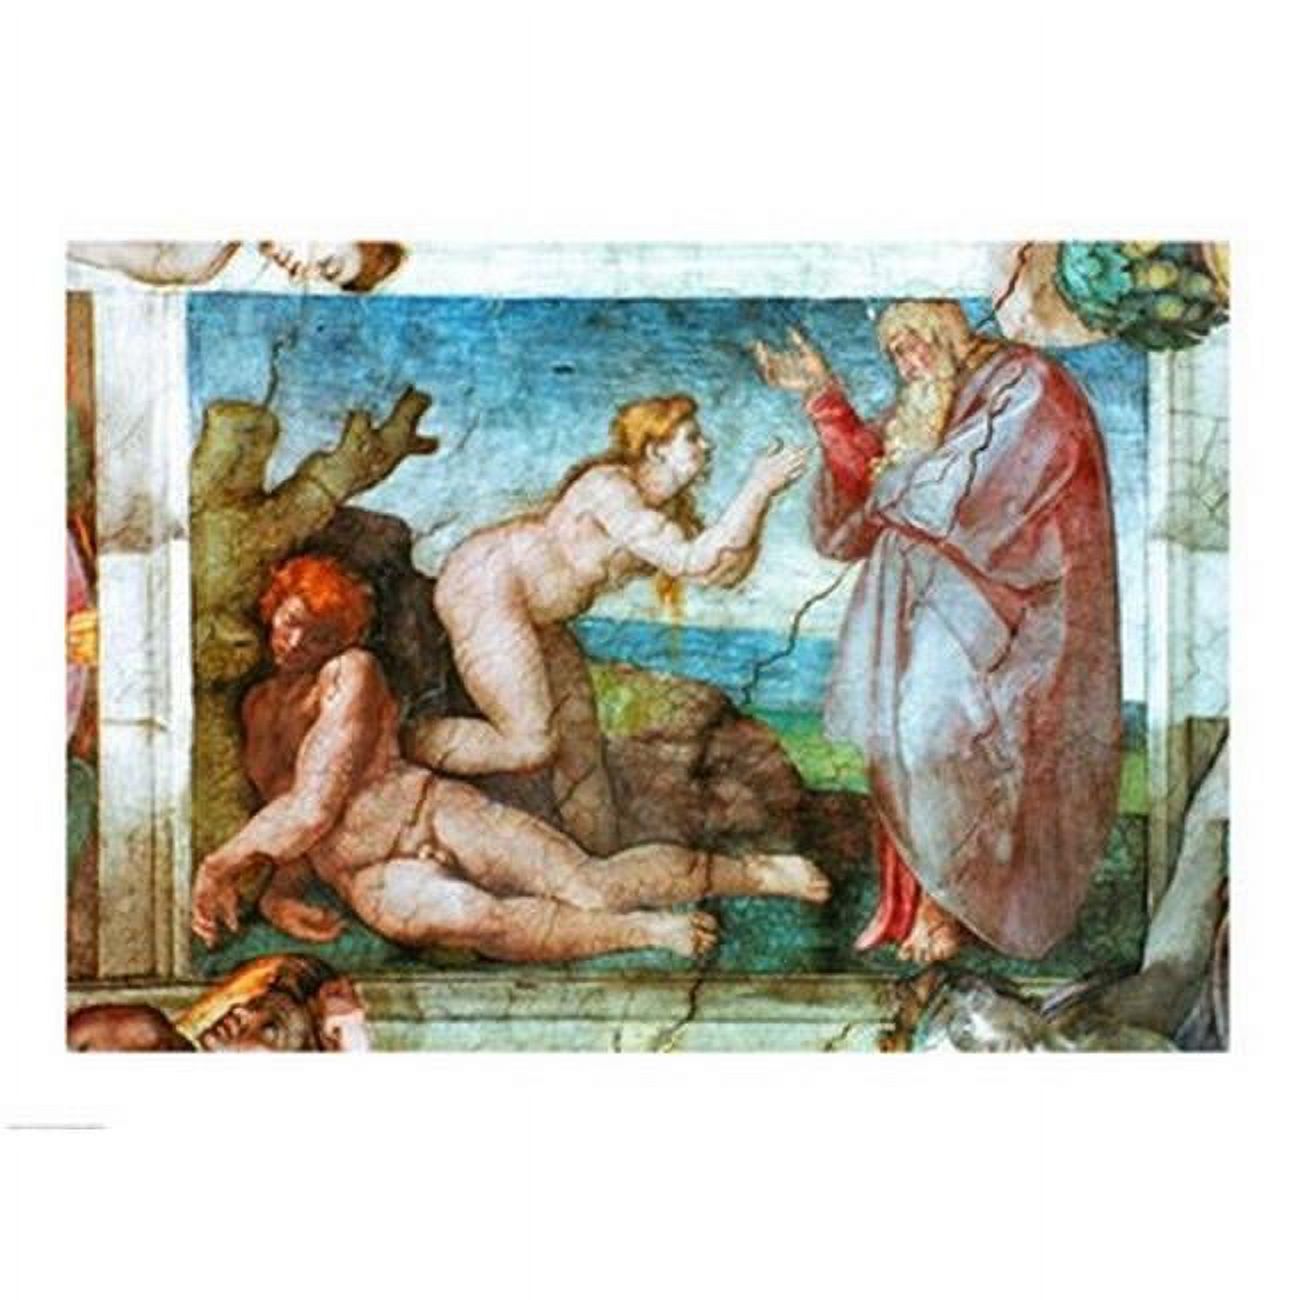 Posterazzi  Sistine Chapel Ceiling Creation of Eve with Four Ignudi 1511 Poster Print by Michelangelo Buonarroti - 24 x 18 in. - image 1 of 1